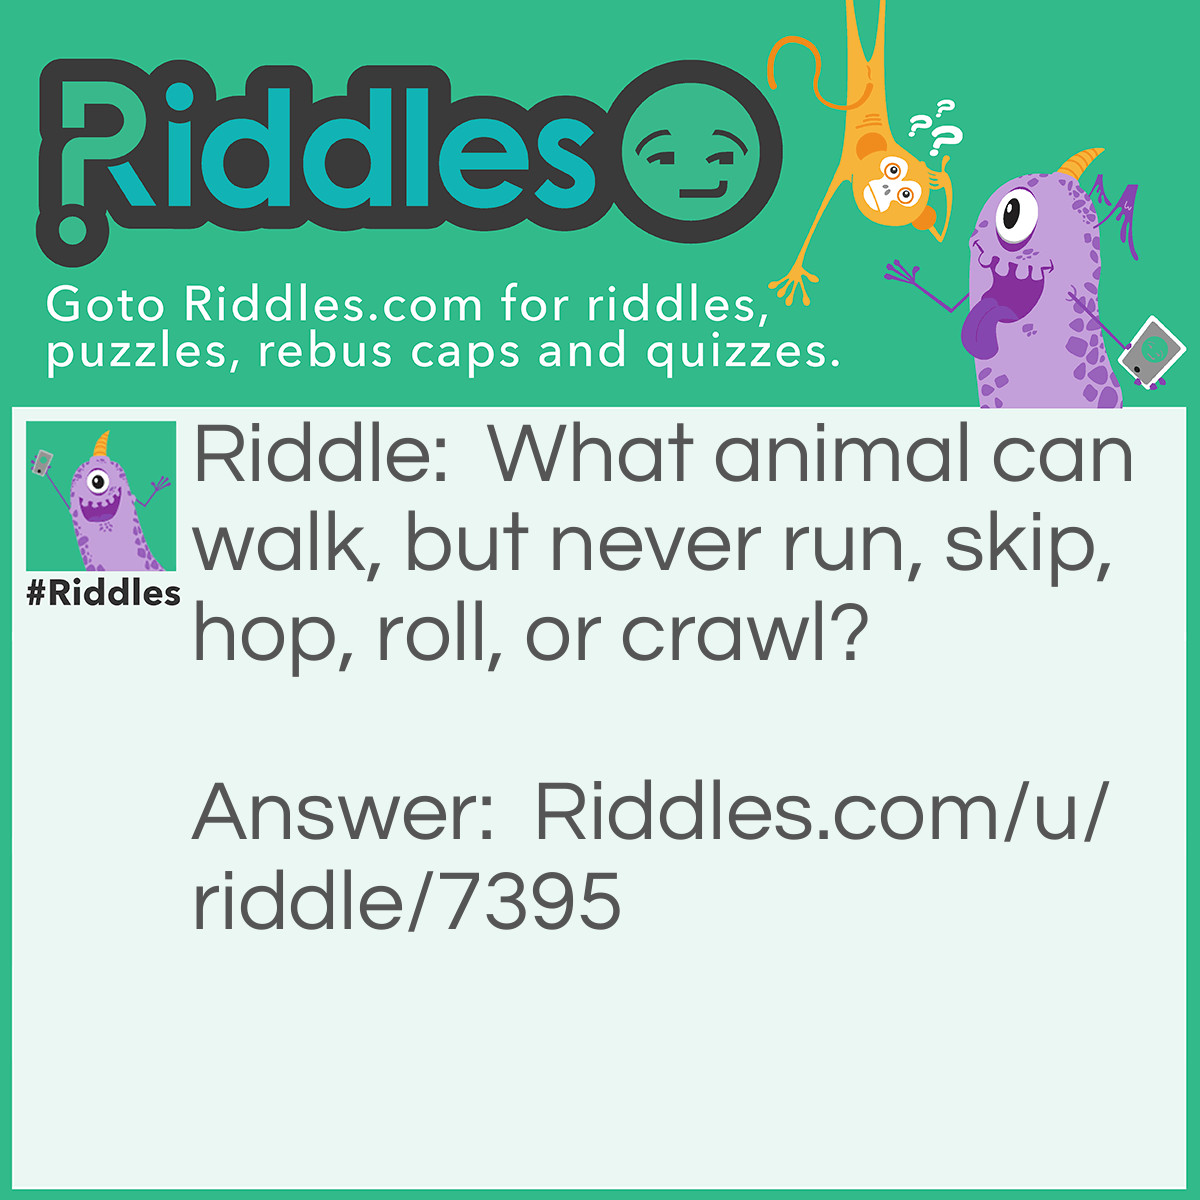 Riddle: What animal can walk, but never run, skip, hop, roll, or crawl? Answer: A walking stick